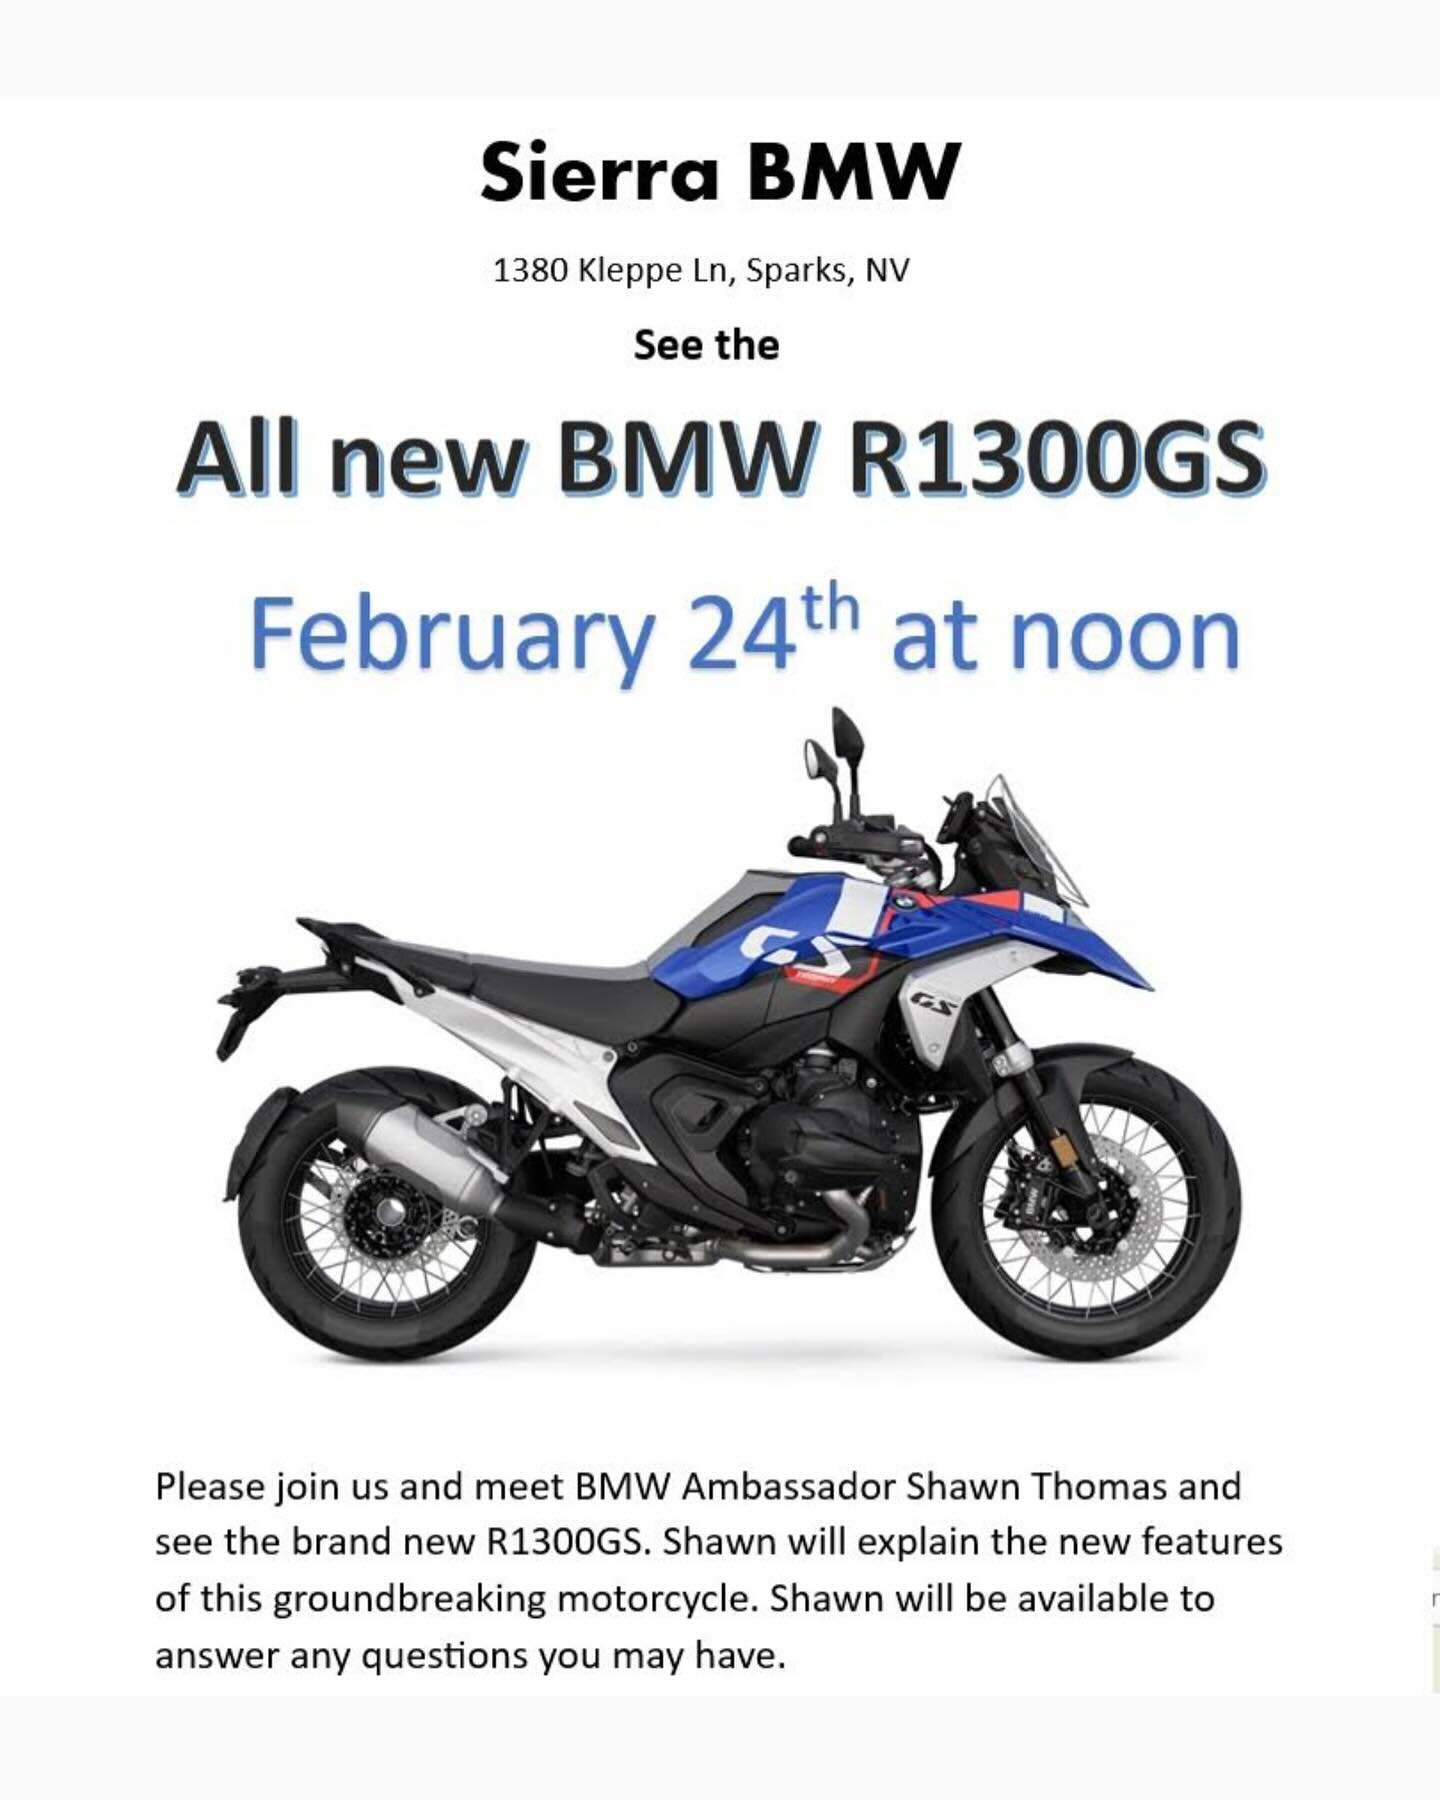 Please join us - see the new BMW R1300GS!🤘🏍️